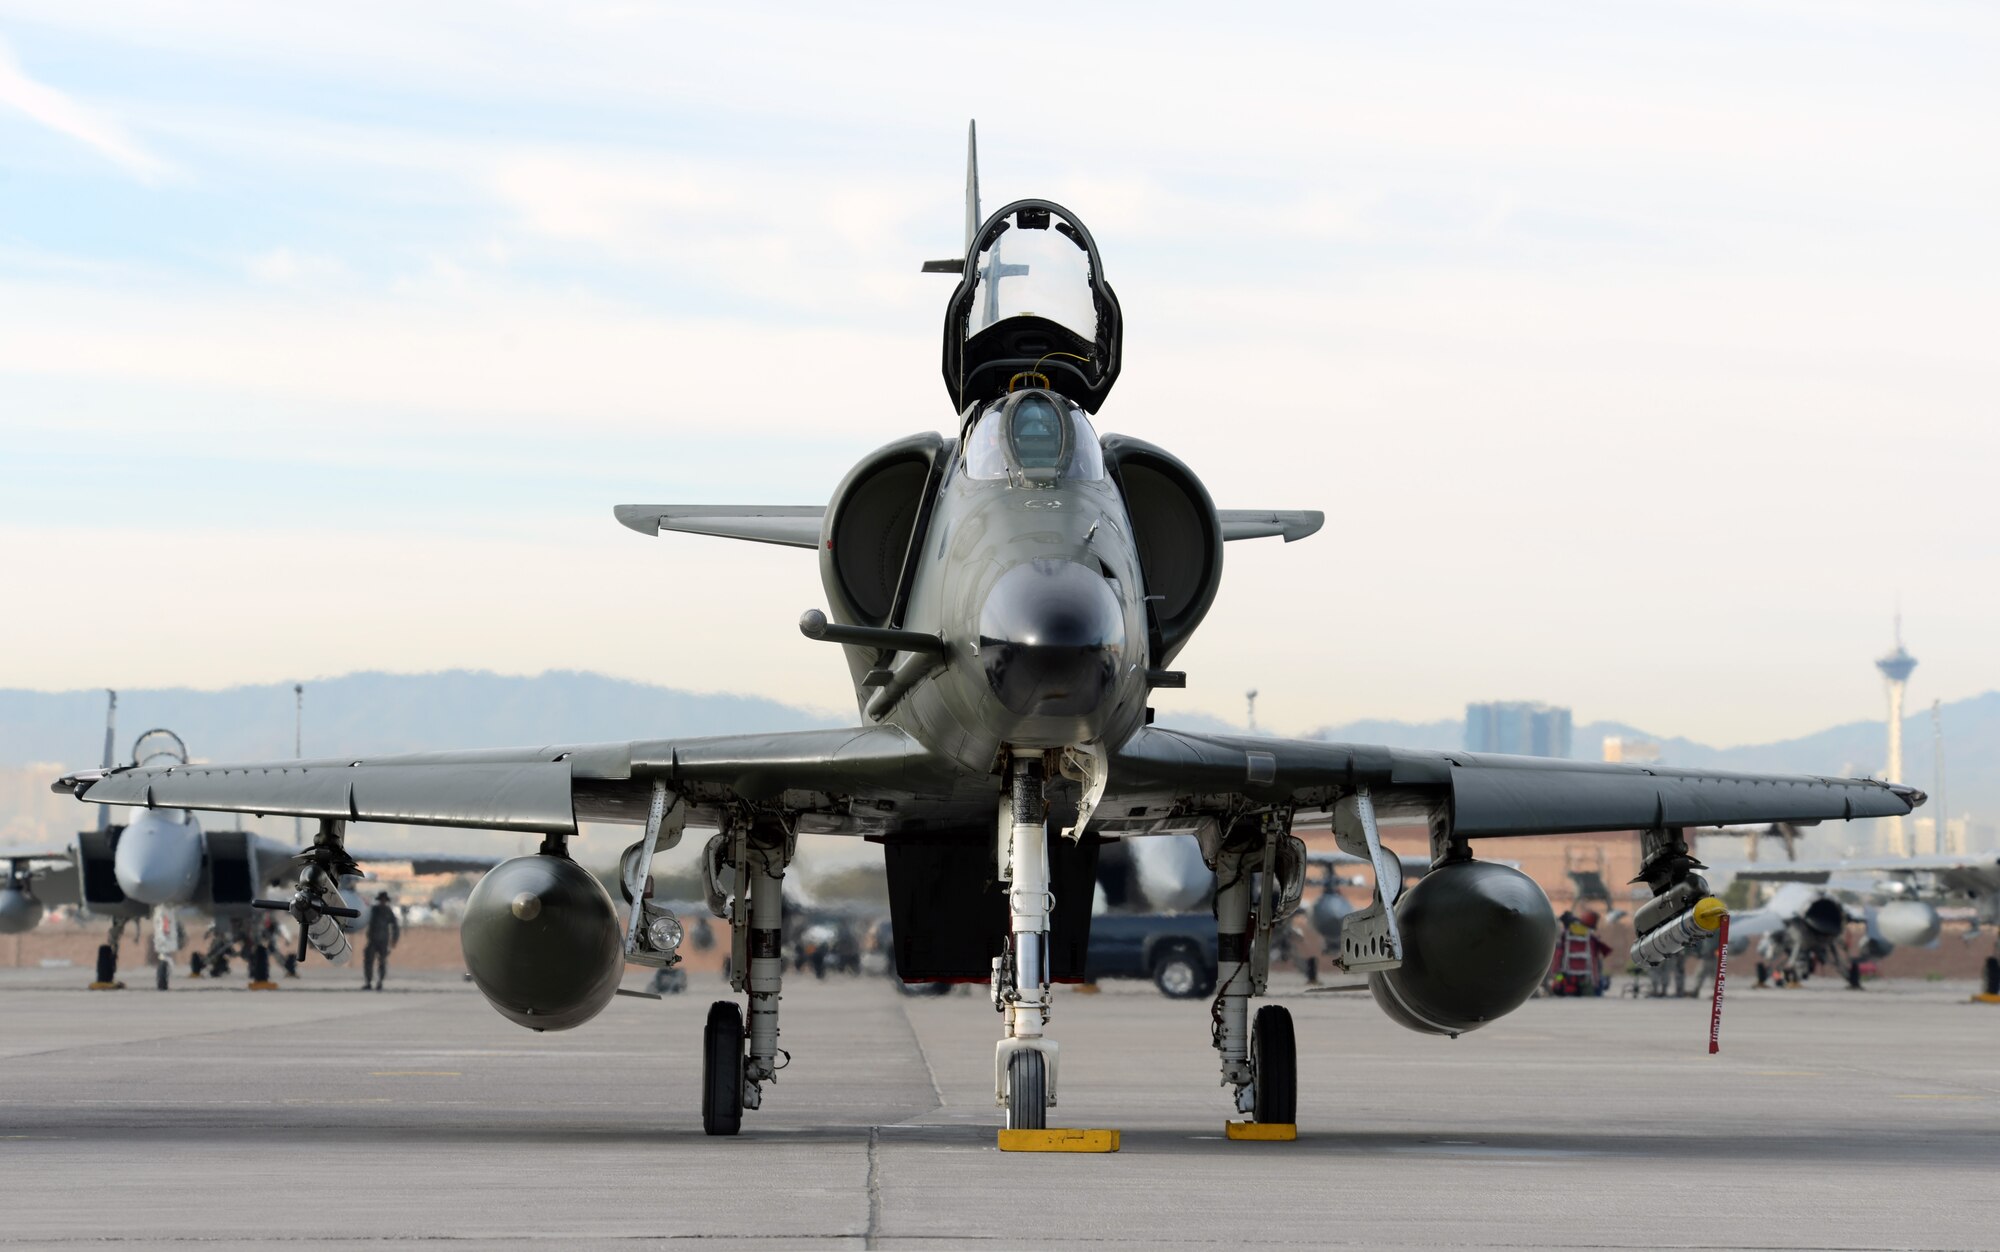 A Draken International A-4 Skyhawk parks on the Nellis Air Force Base, Nev., flightline awaiting preflight check on Dec. 3, 2015. Draken is used to support various types of military training objectives around the globe. (U.S. Air Force photo by Airman 1st Class Rachel Loftis)